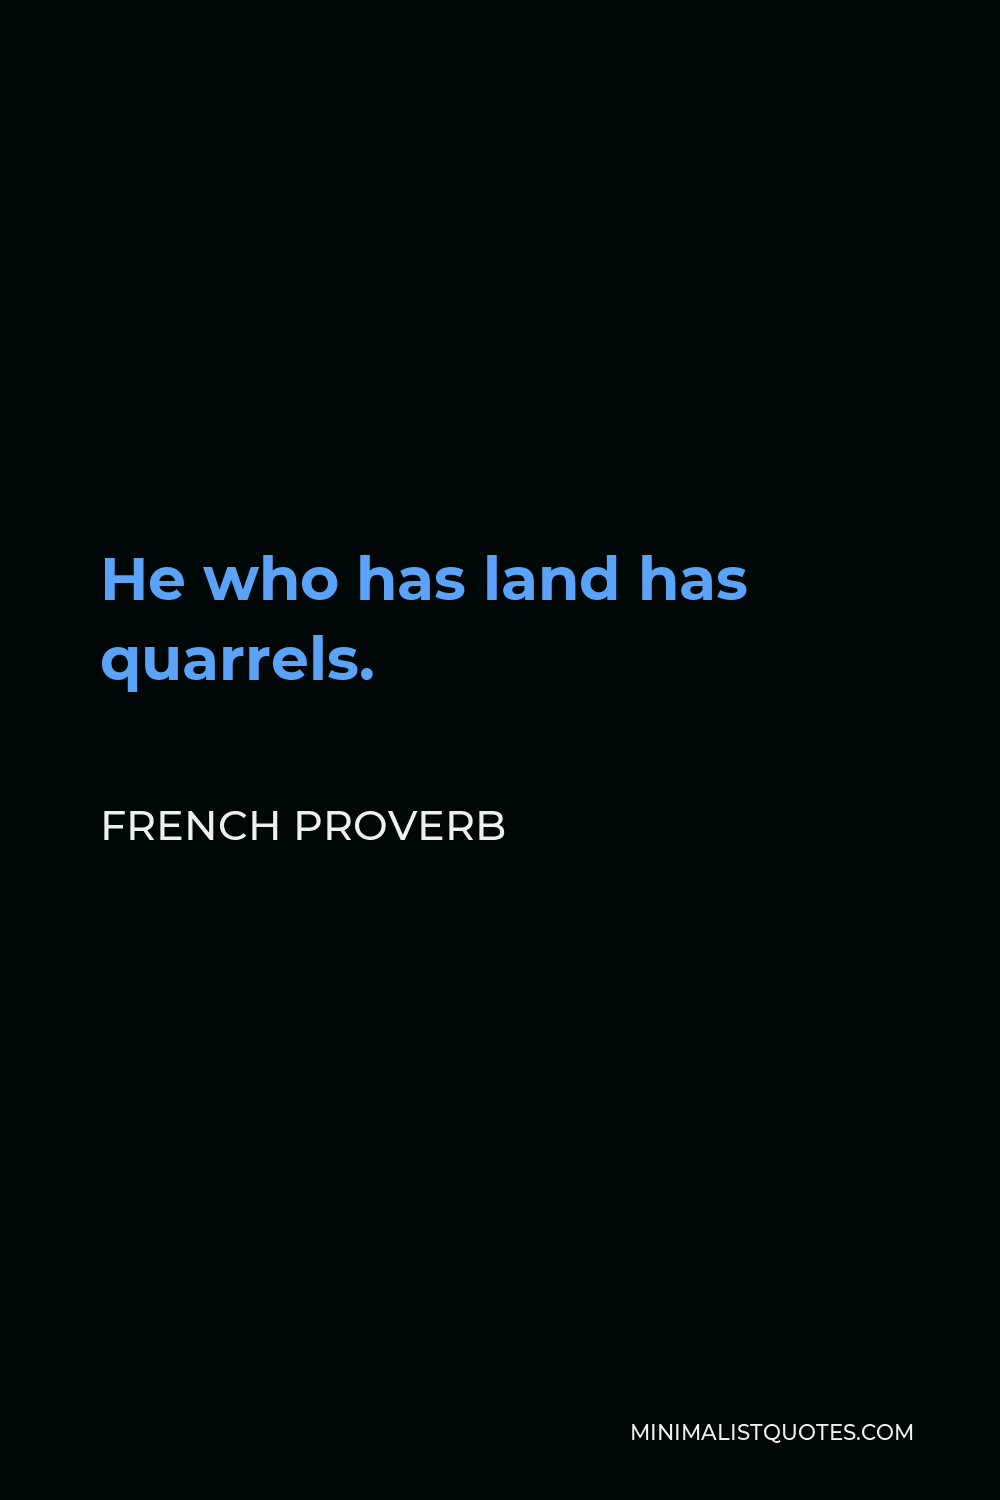 French Proverb Quote - He who has land has quarrels.